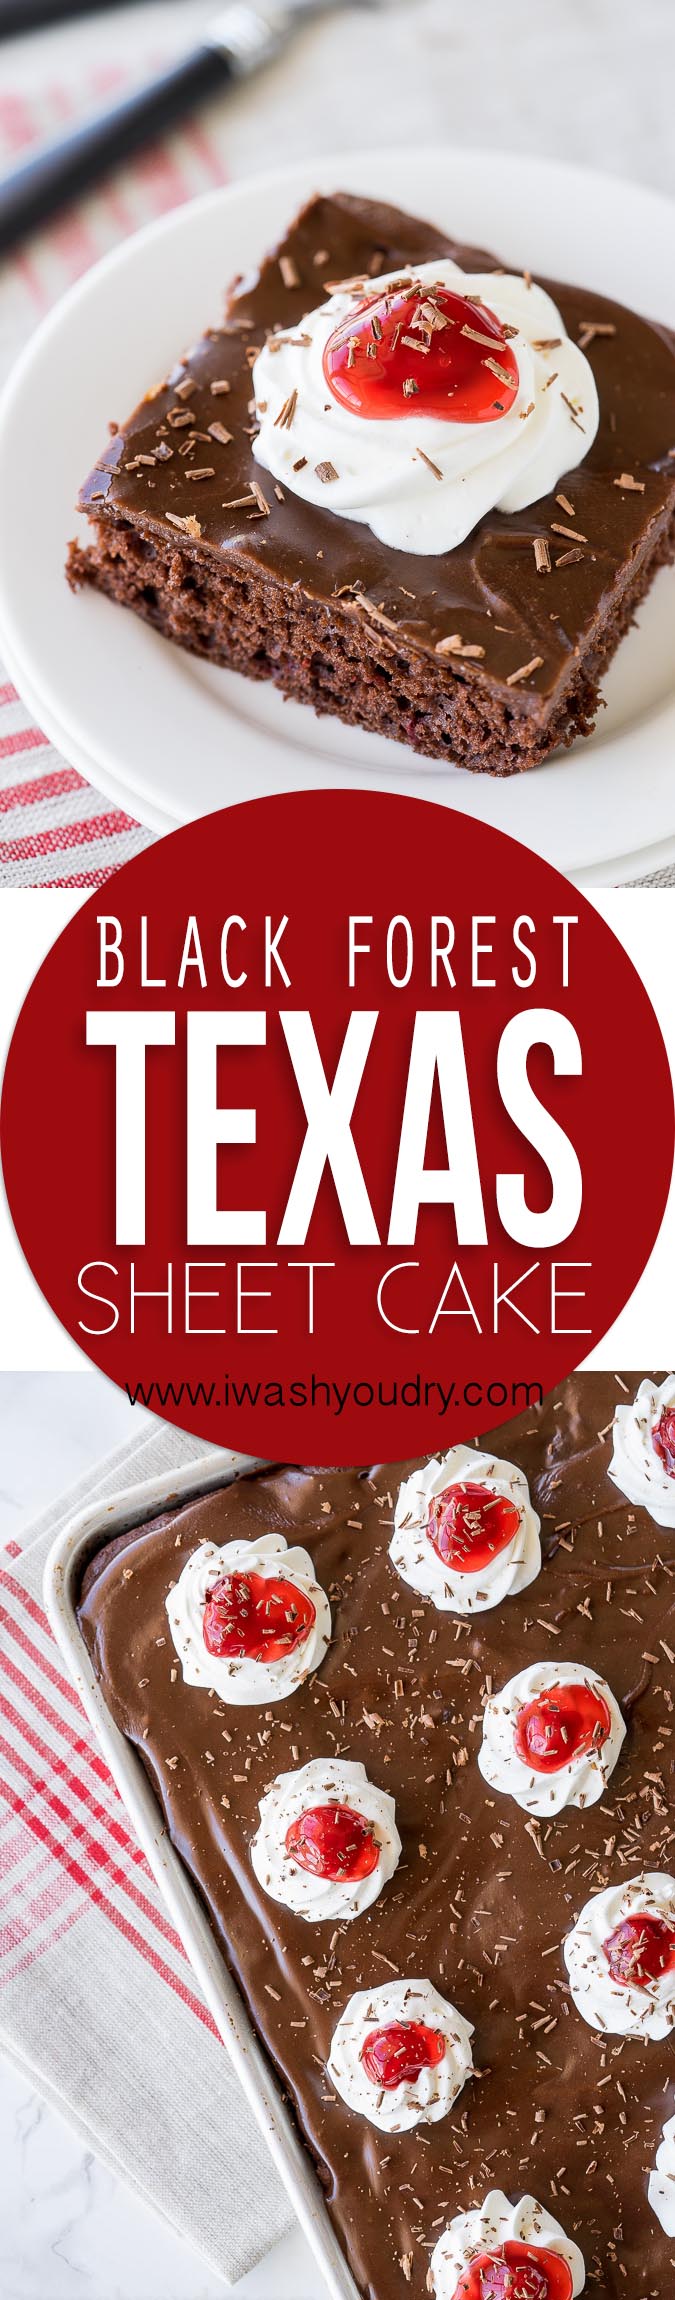 This Black Forest Texas Sheet Cake is seriously so good! I am usually pretty reserved when it comes to cake, but I had to go back for seconds on this one! This one is a keeper!